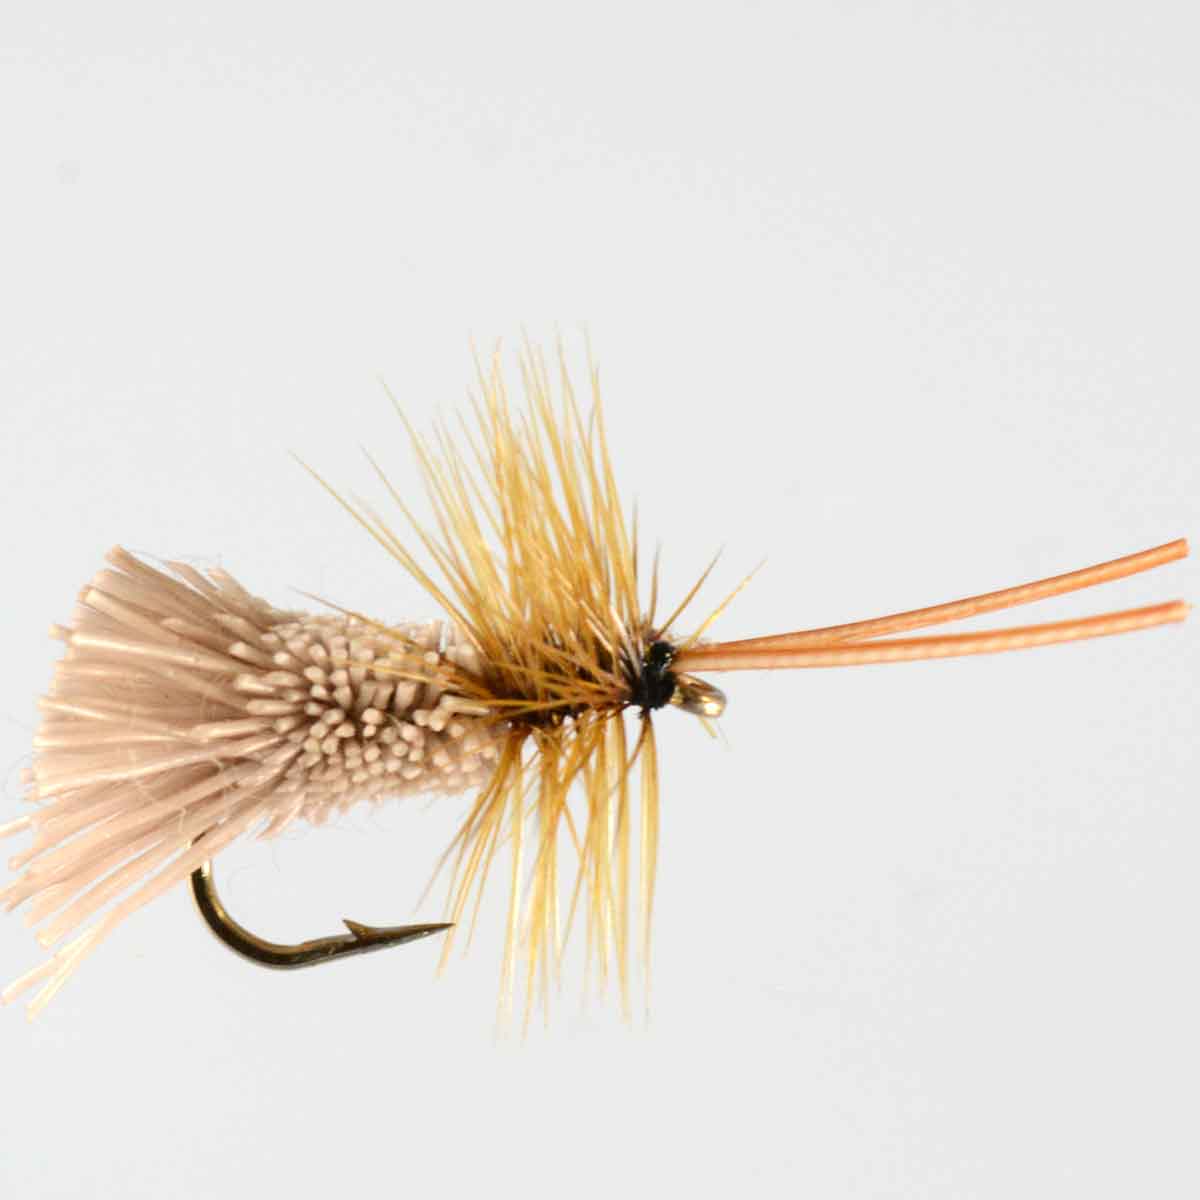 hCtC S_[hJfBX i`(#12 #14) tC tBbVO  ނ } Ci A}S k Ǘނ ދ dry fly fishing